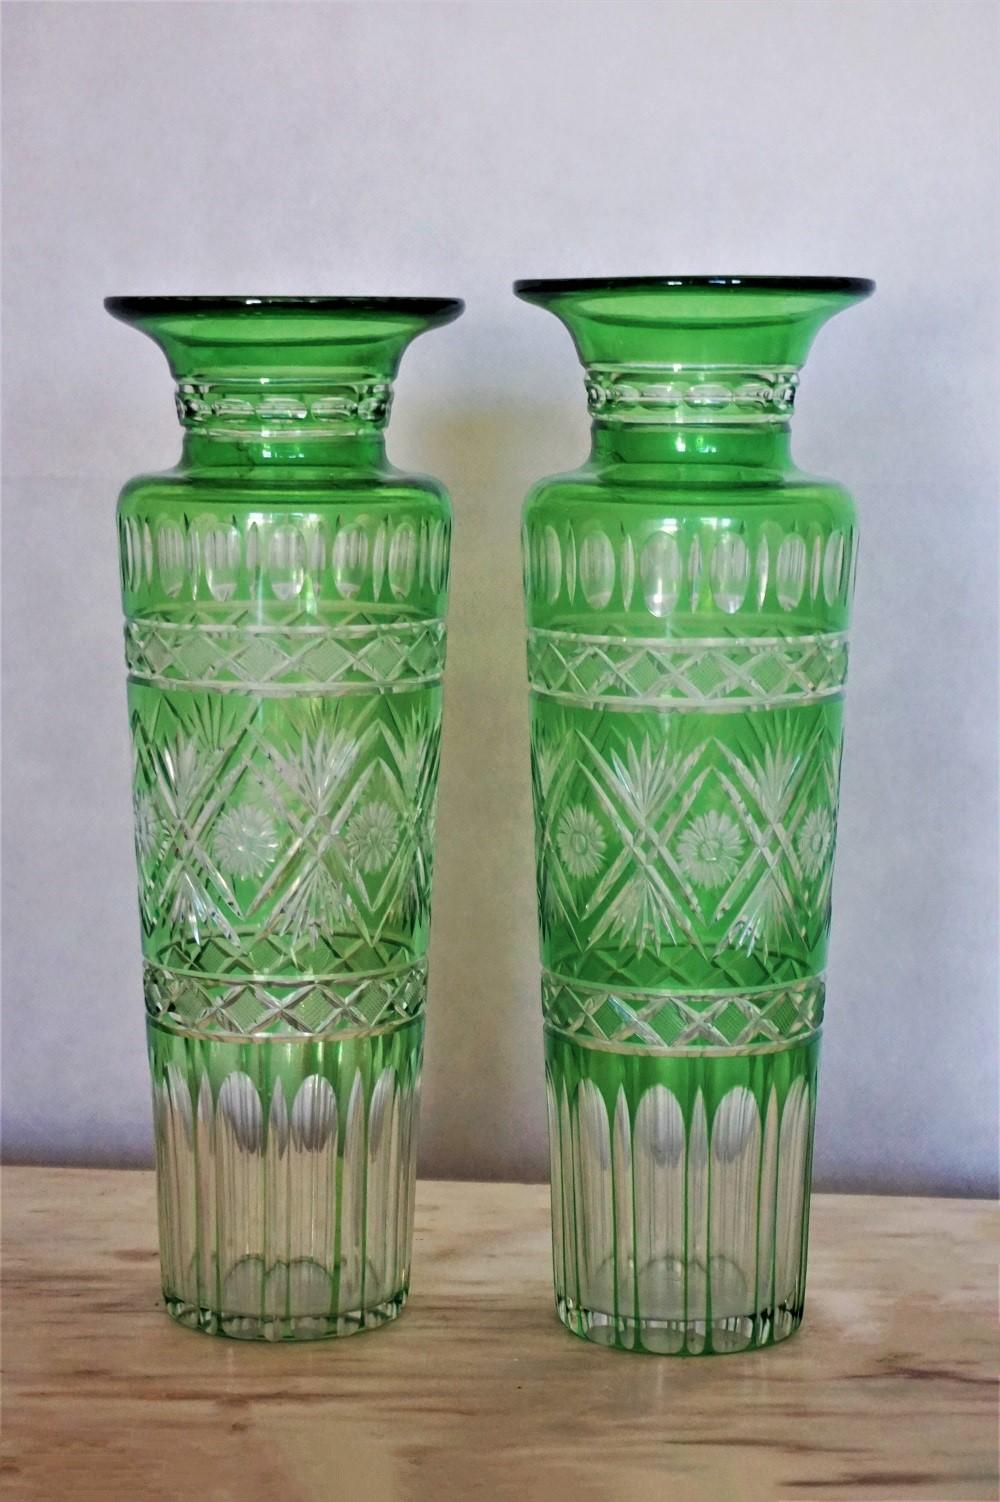 Pair of hand blown crystal vases green cut to clear with elegant and clean lines in Art Deco design, France, circa 1920-1930.
Dimensions: Height 12.25